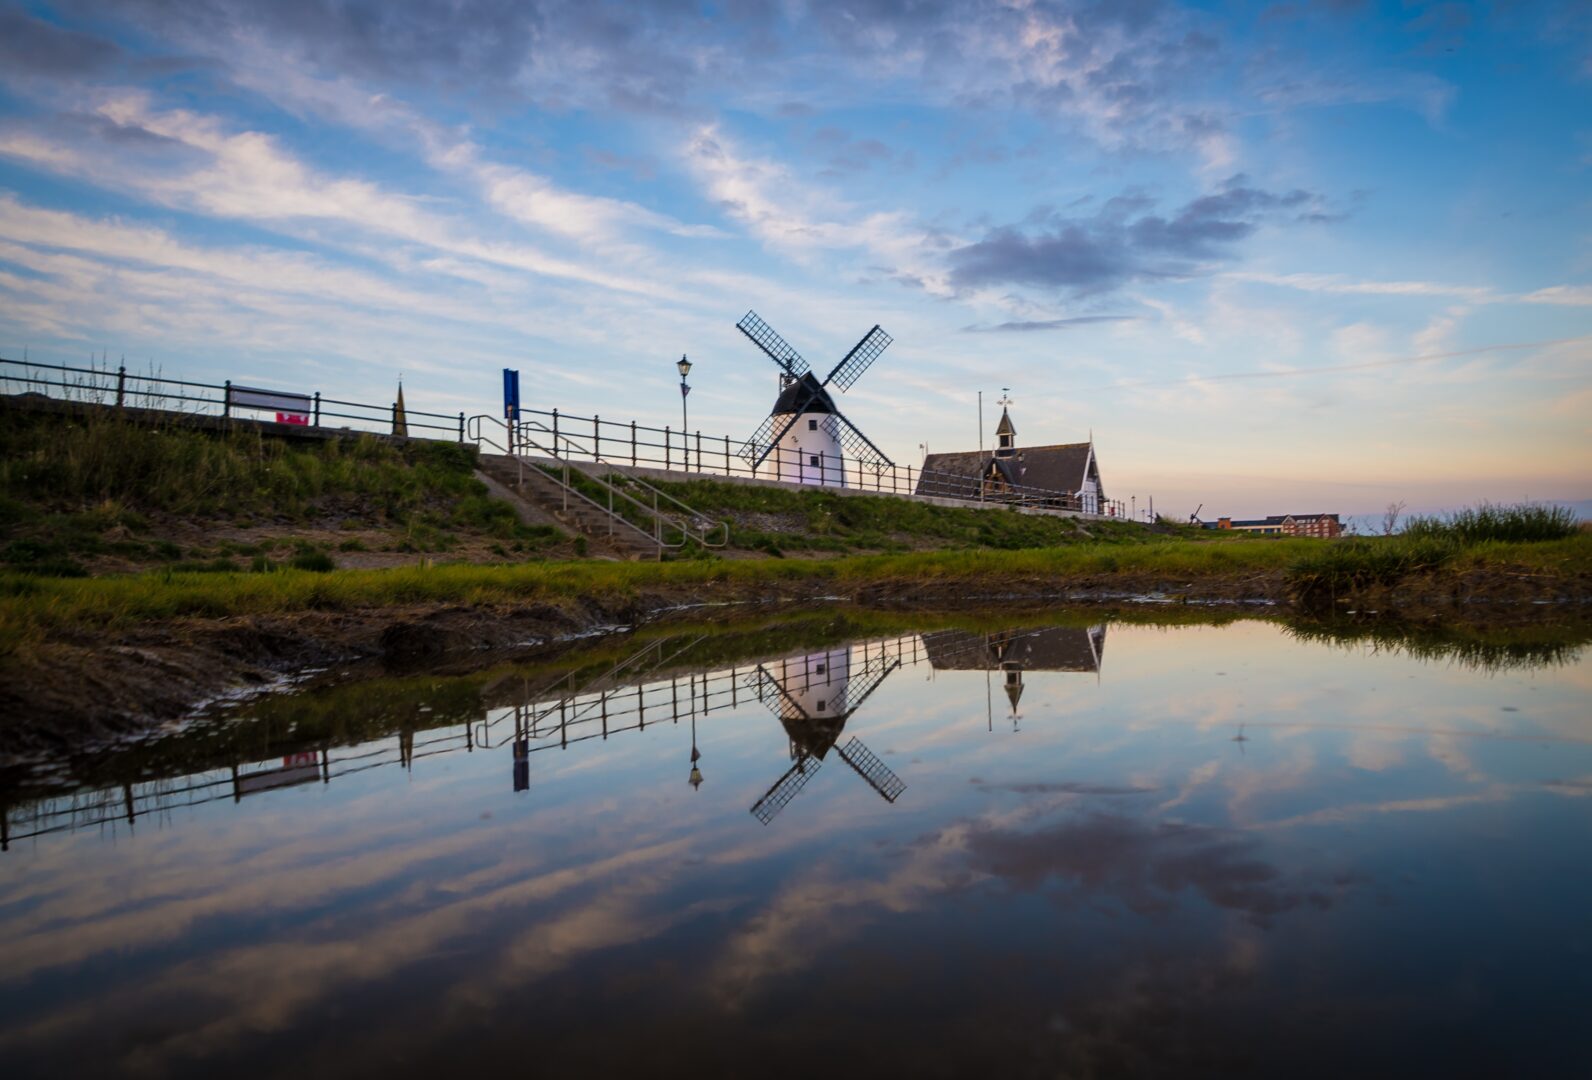 A view of the waterside at Lytham St Annes, with a windmill in the background